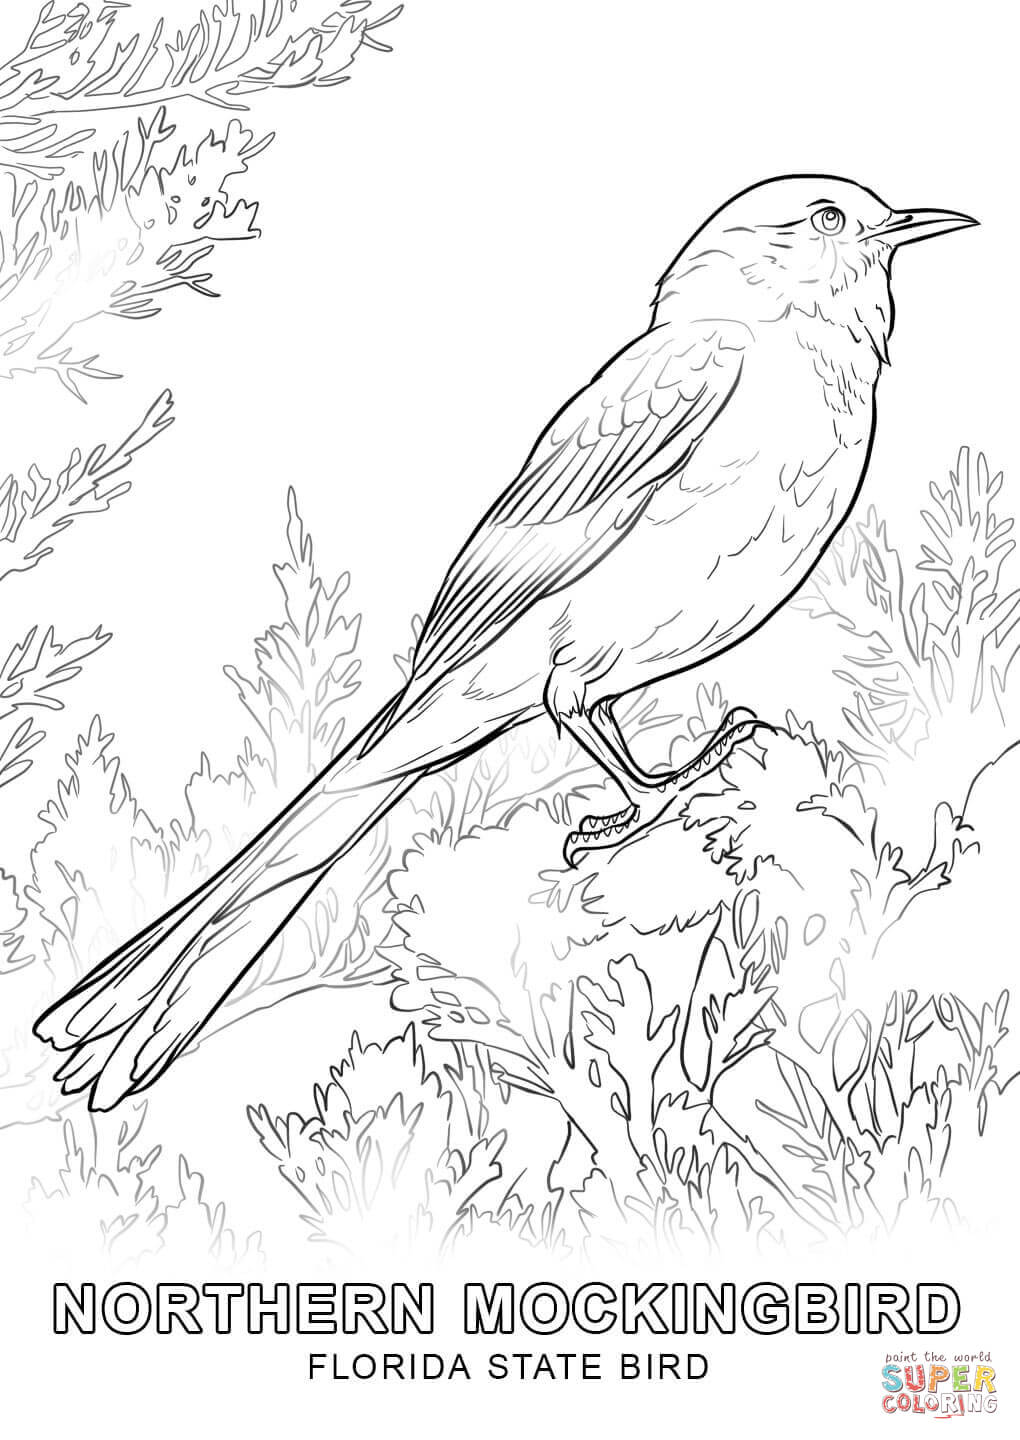 Florida State Bird coloring page | Free Printable Coloring Pages